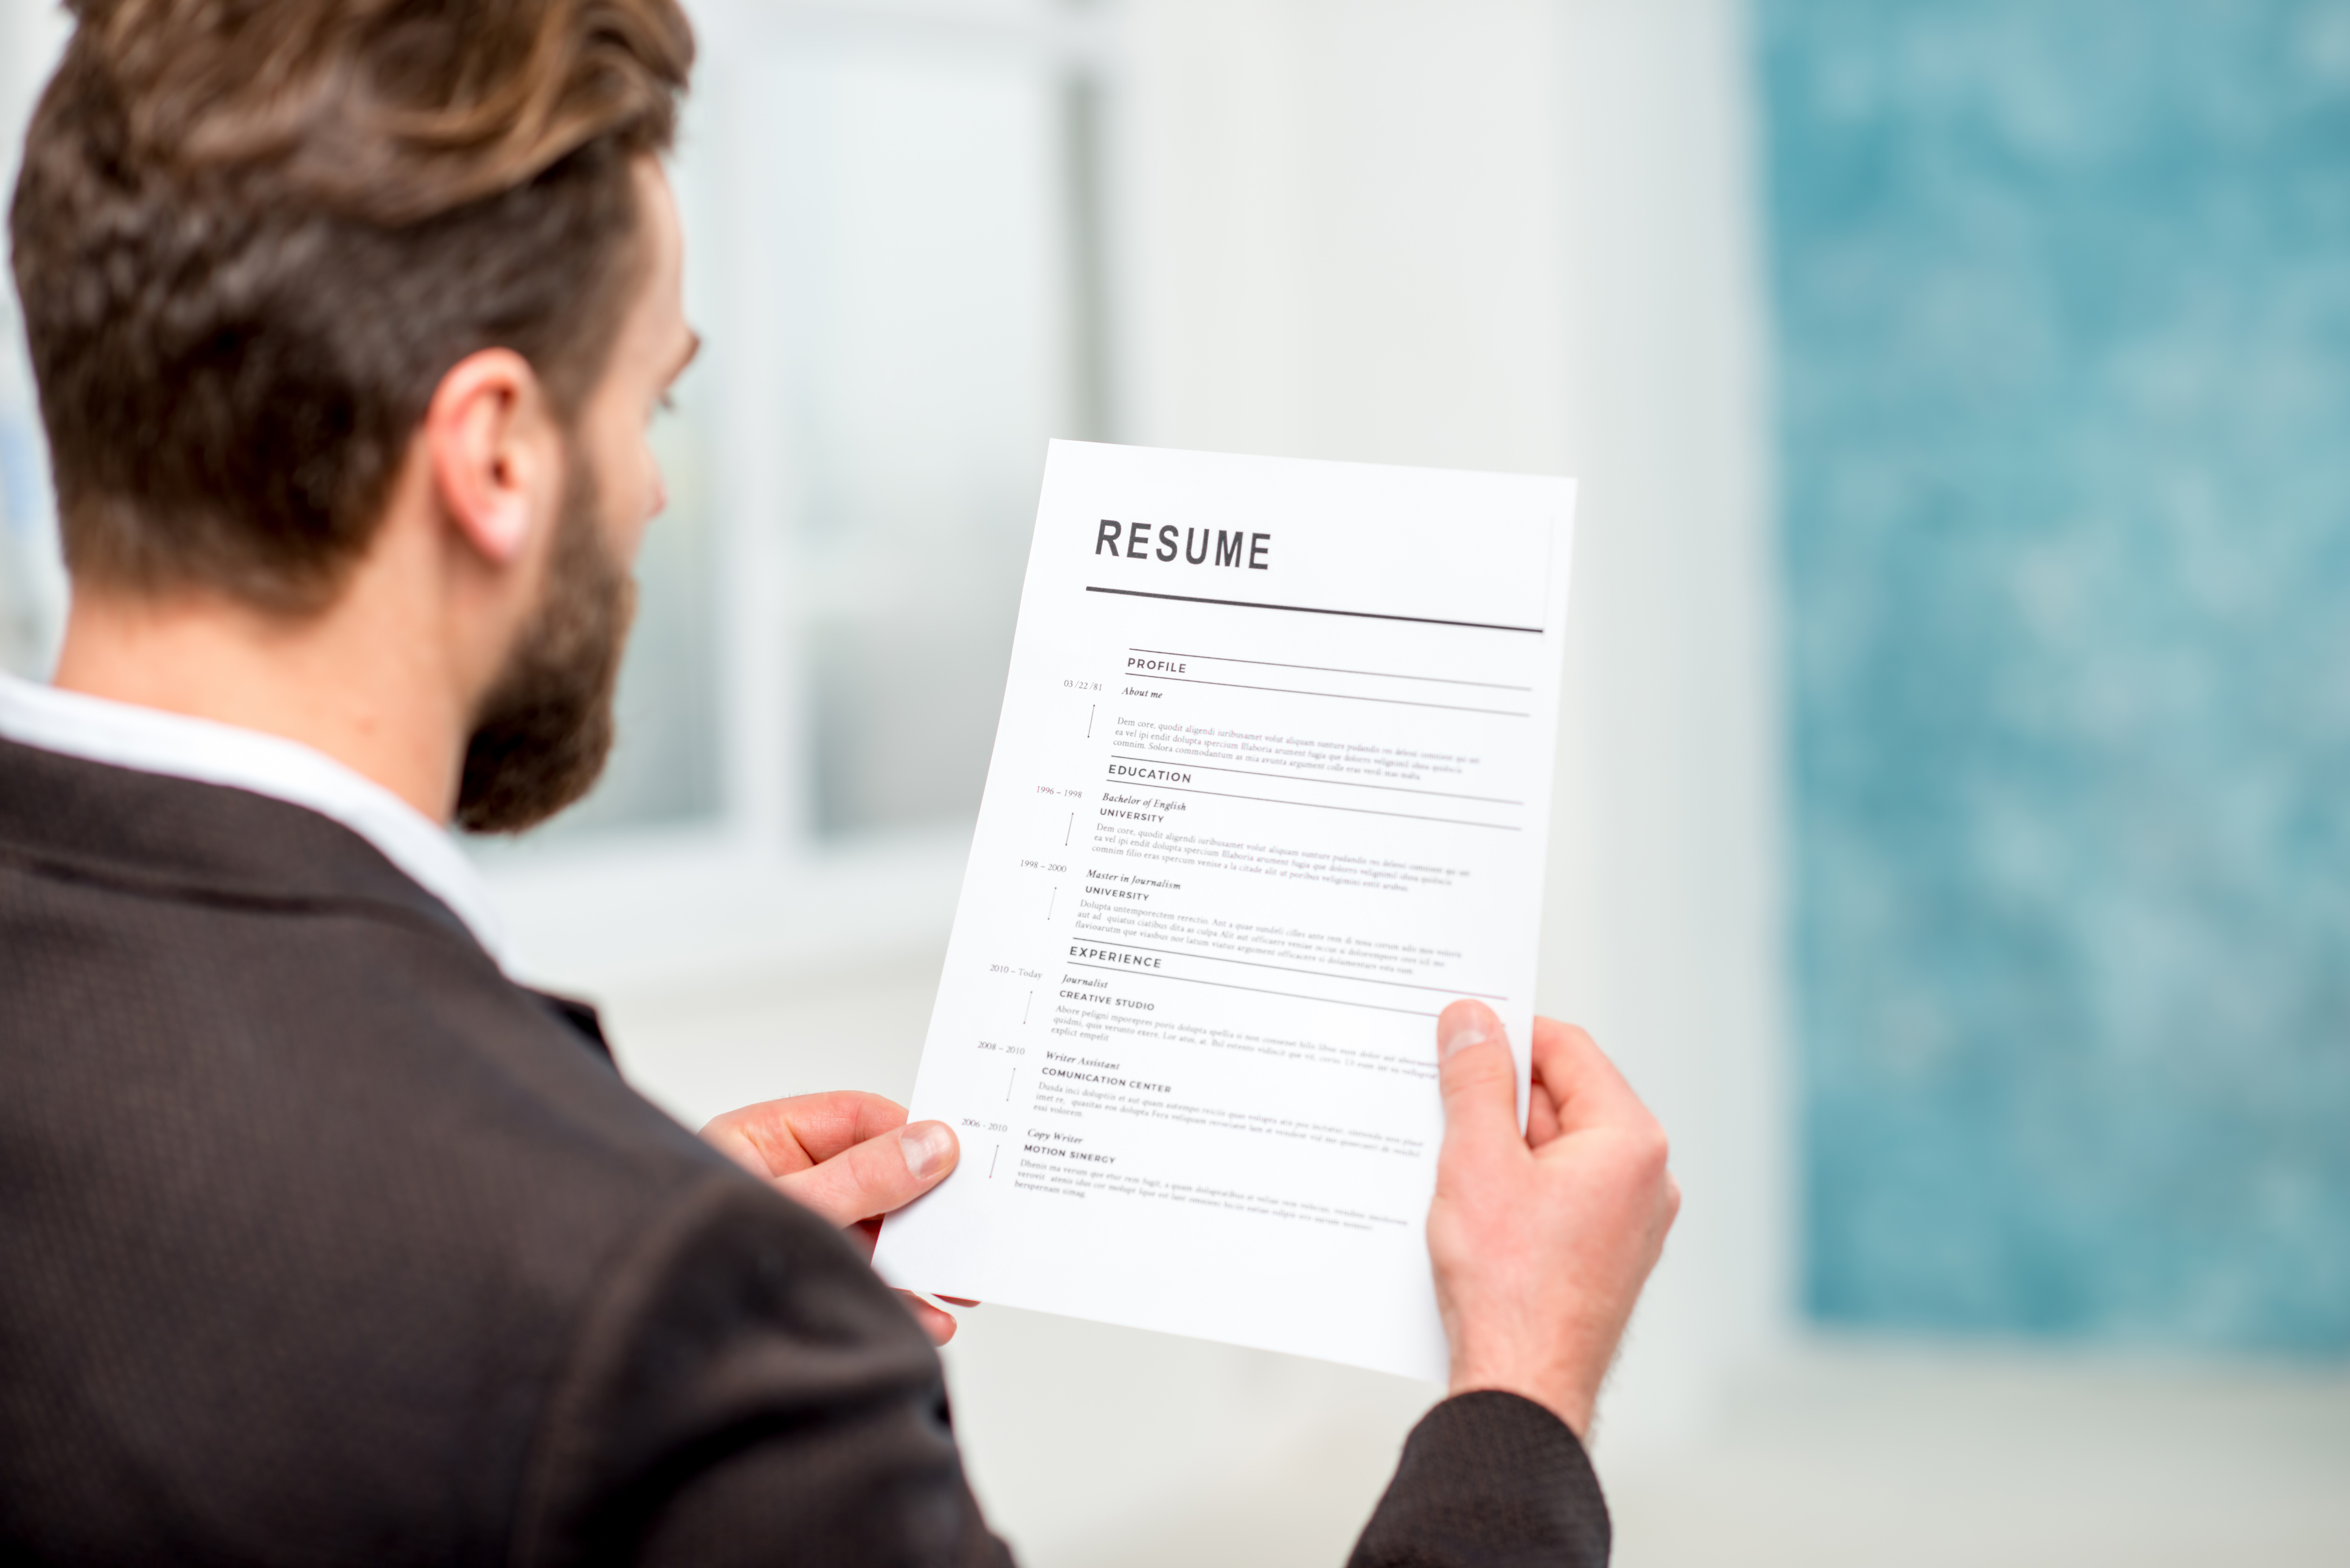 resume writing course